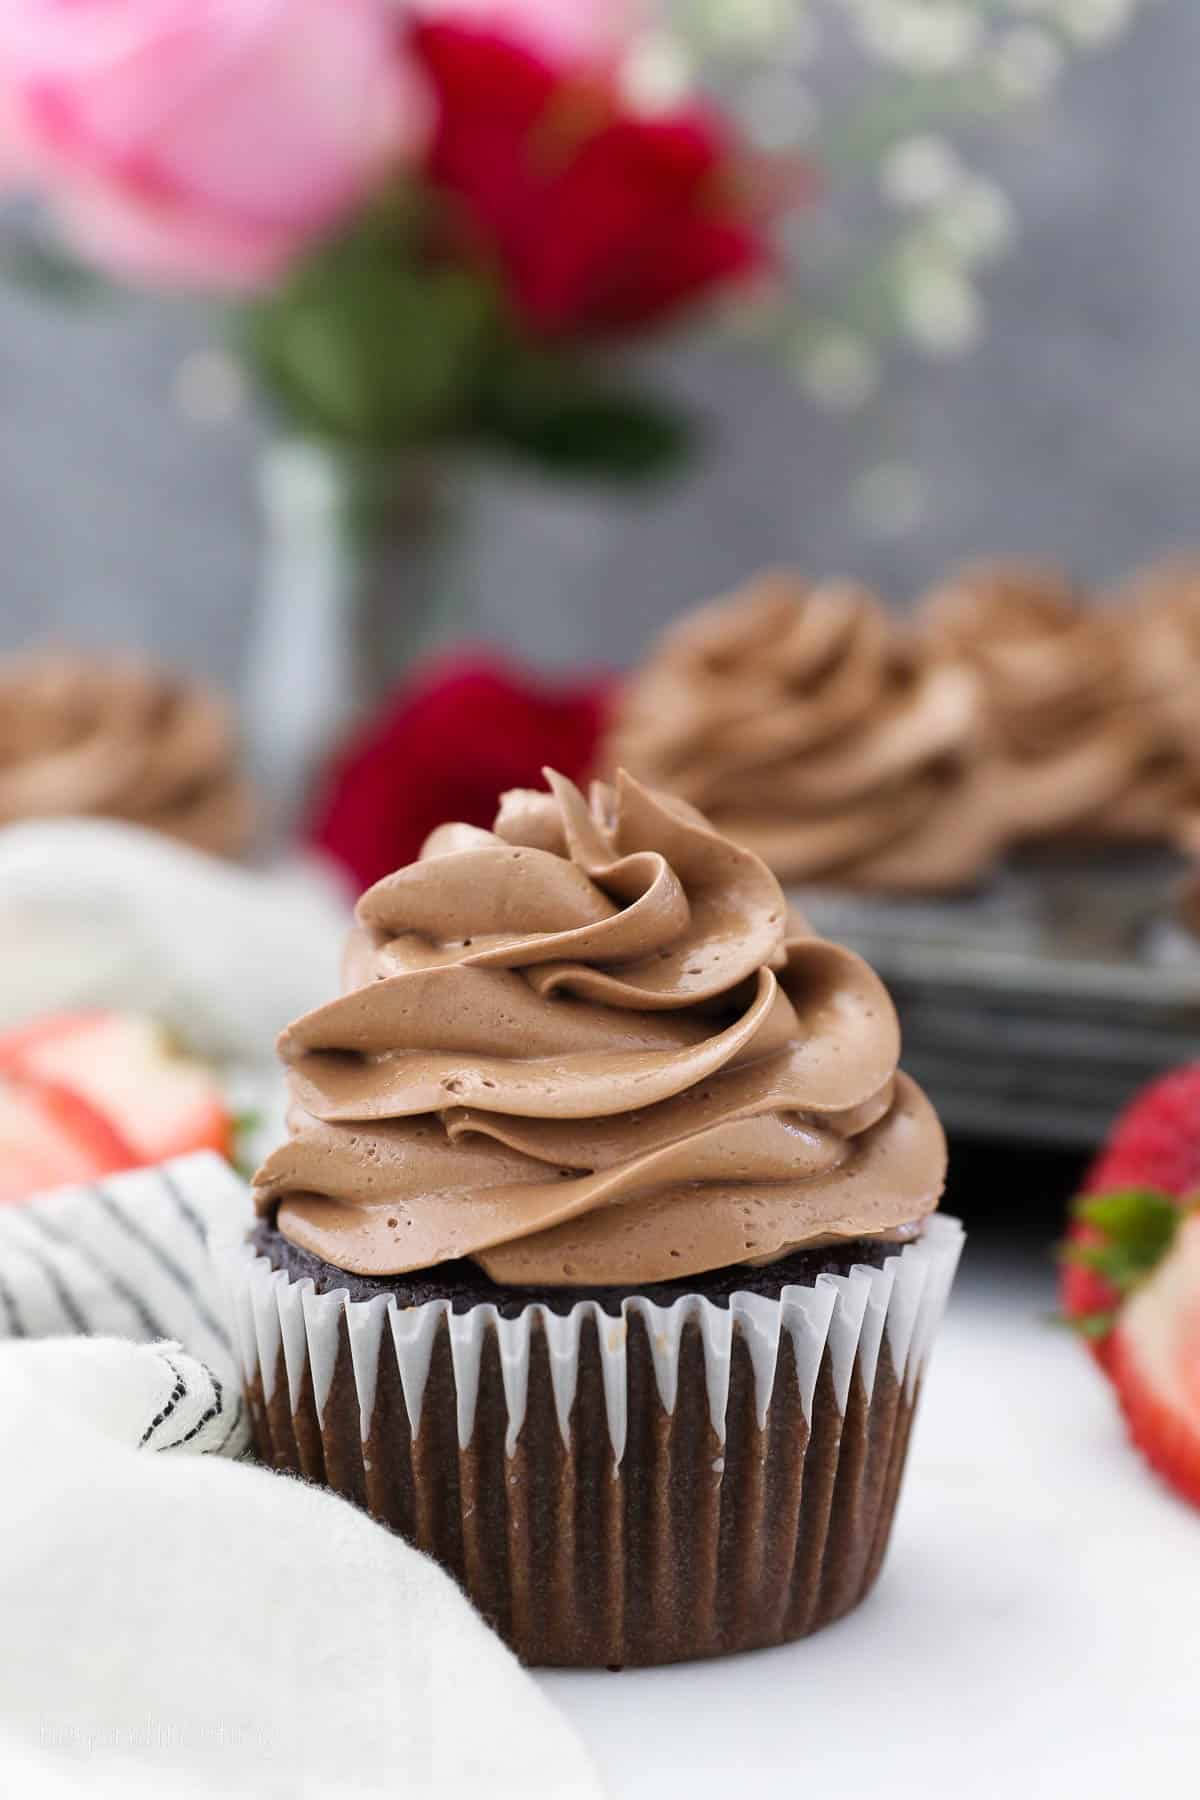 One chocolate cupcake frosted with chocolate Swiss meringue buttercream with a pan of more cupcakes in background.